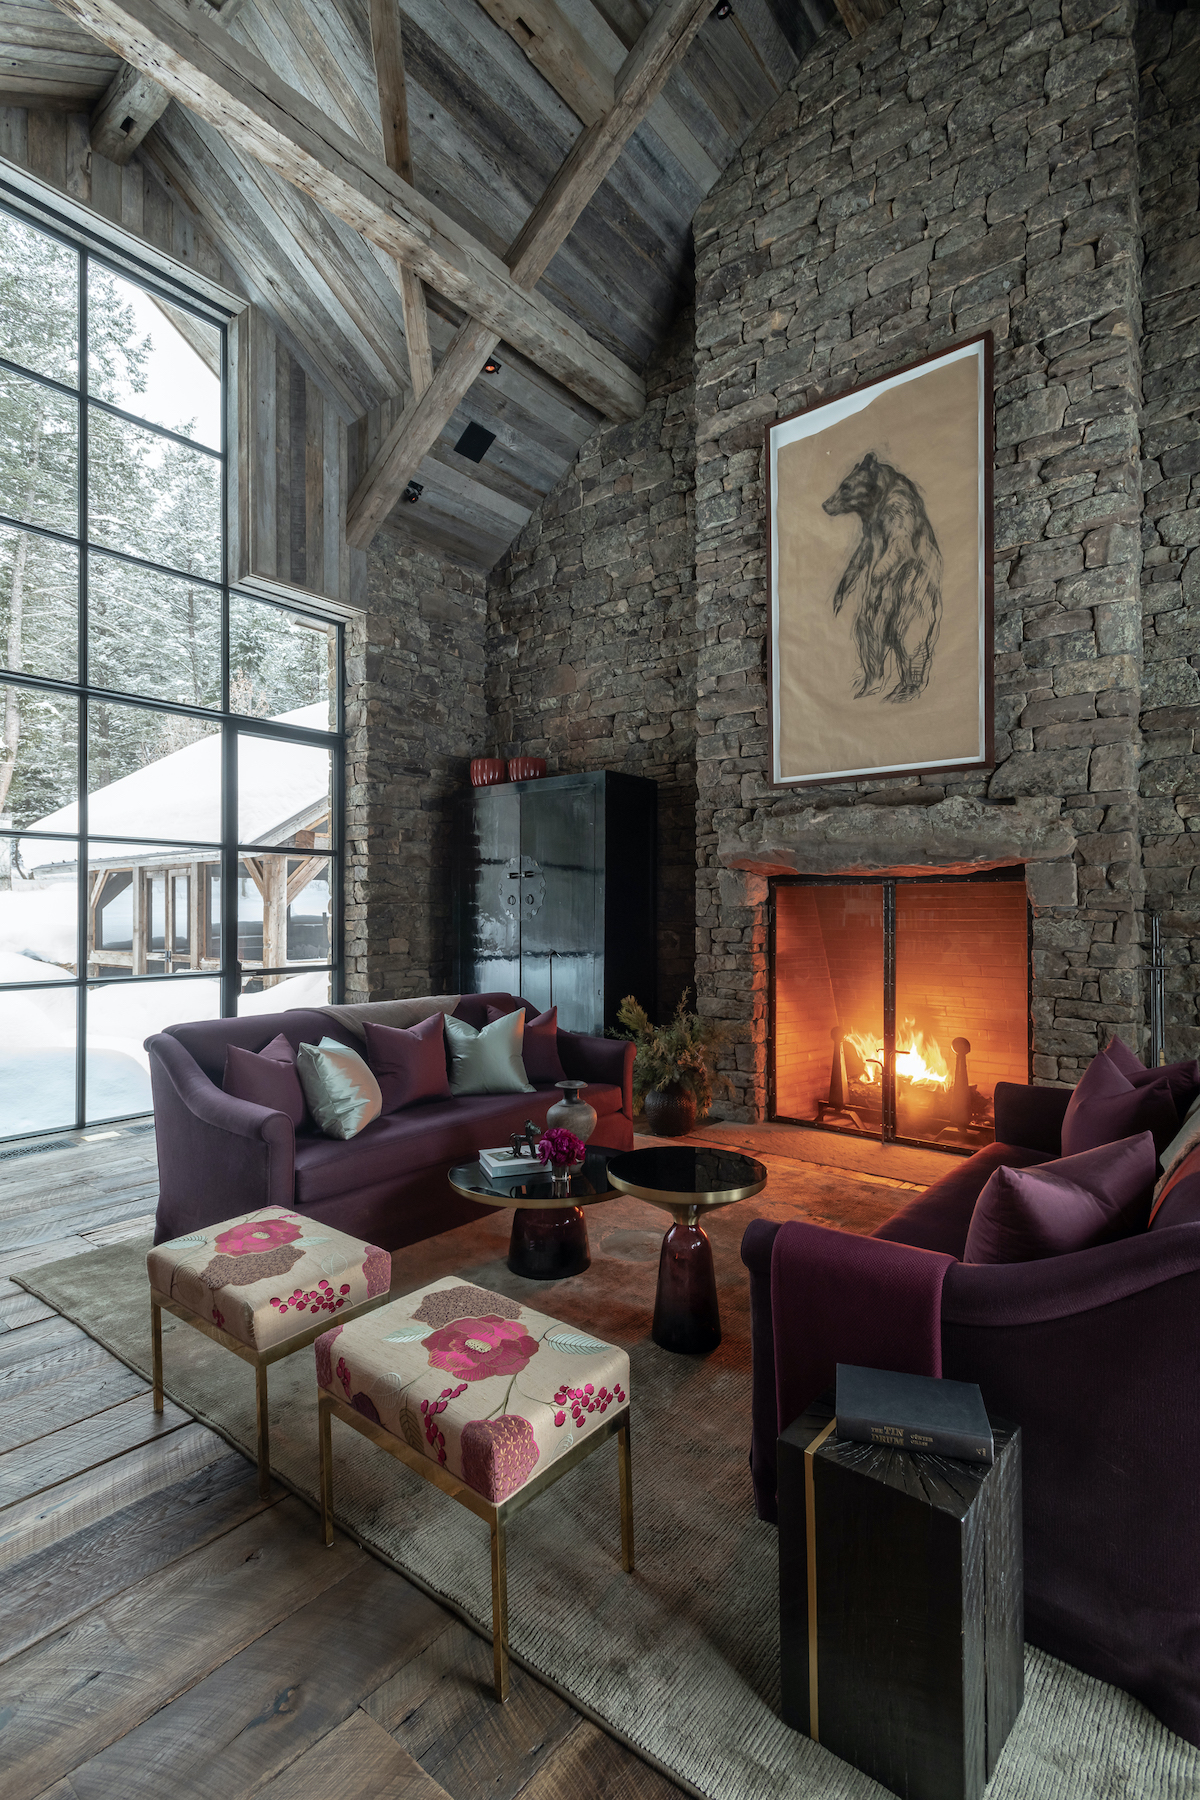 Jackson Hole interior designer and gallery owner Tayloe Piggot found interior inspiration in JLF Architects’ history-laden design and character-rich reclaimed timber and stone (PC: Audrey Hall).